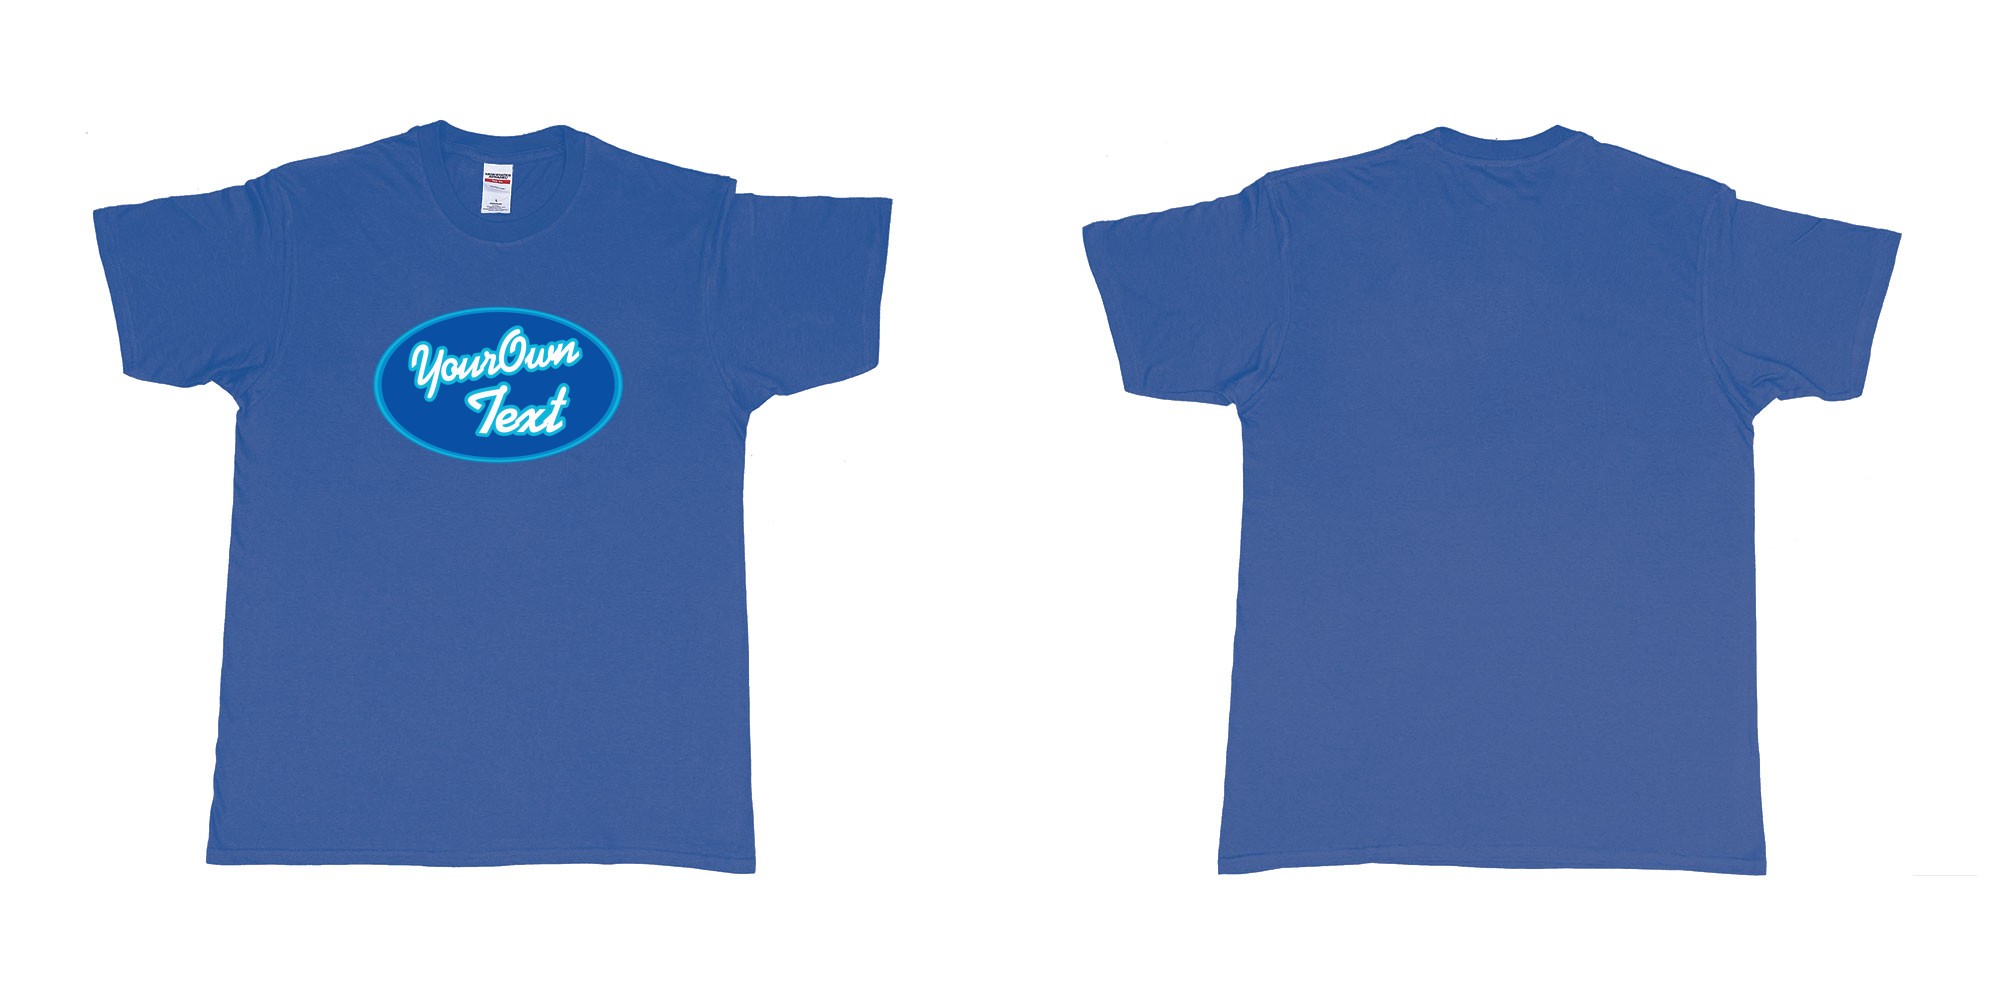 Custom tshirt design America got talent in fabric color royal-blue choice your own text made in Bali by The Pirate Way